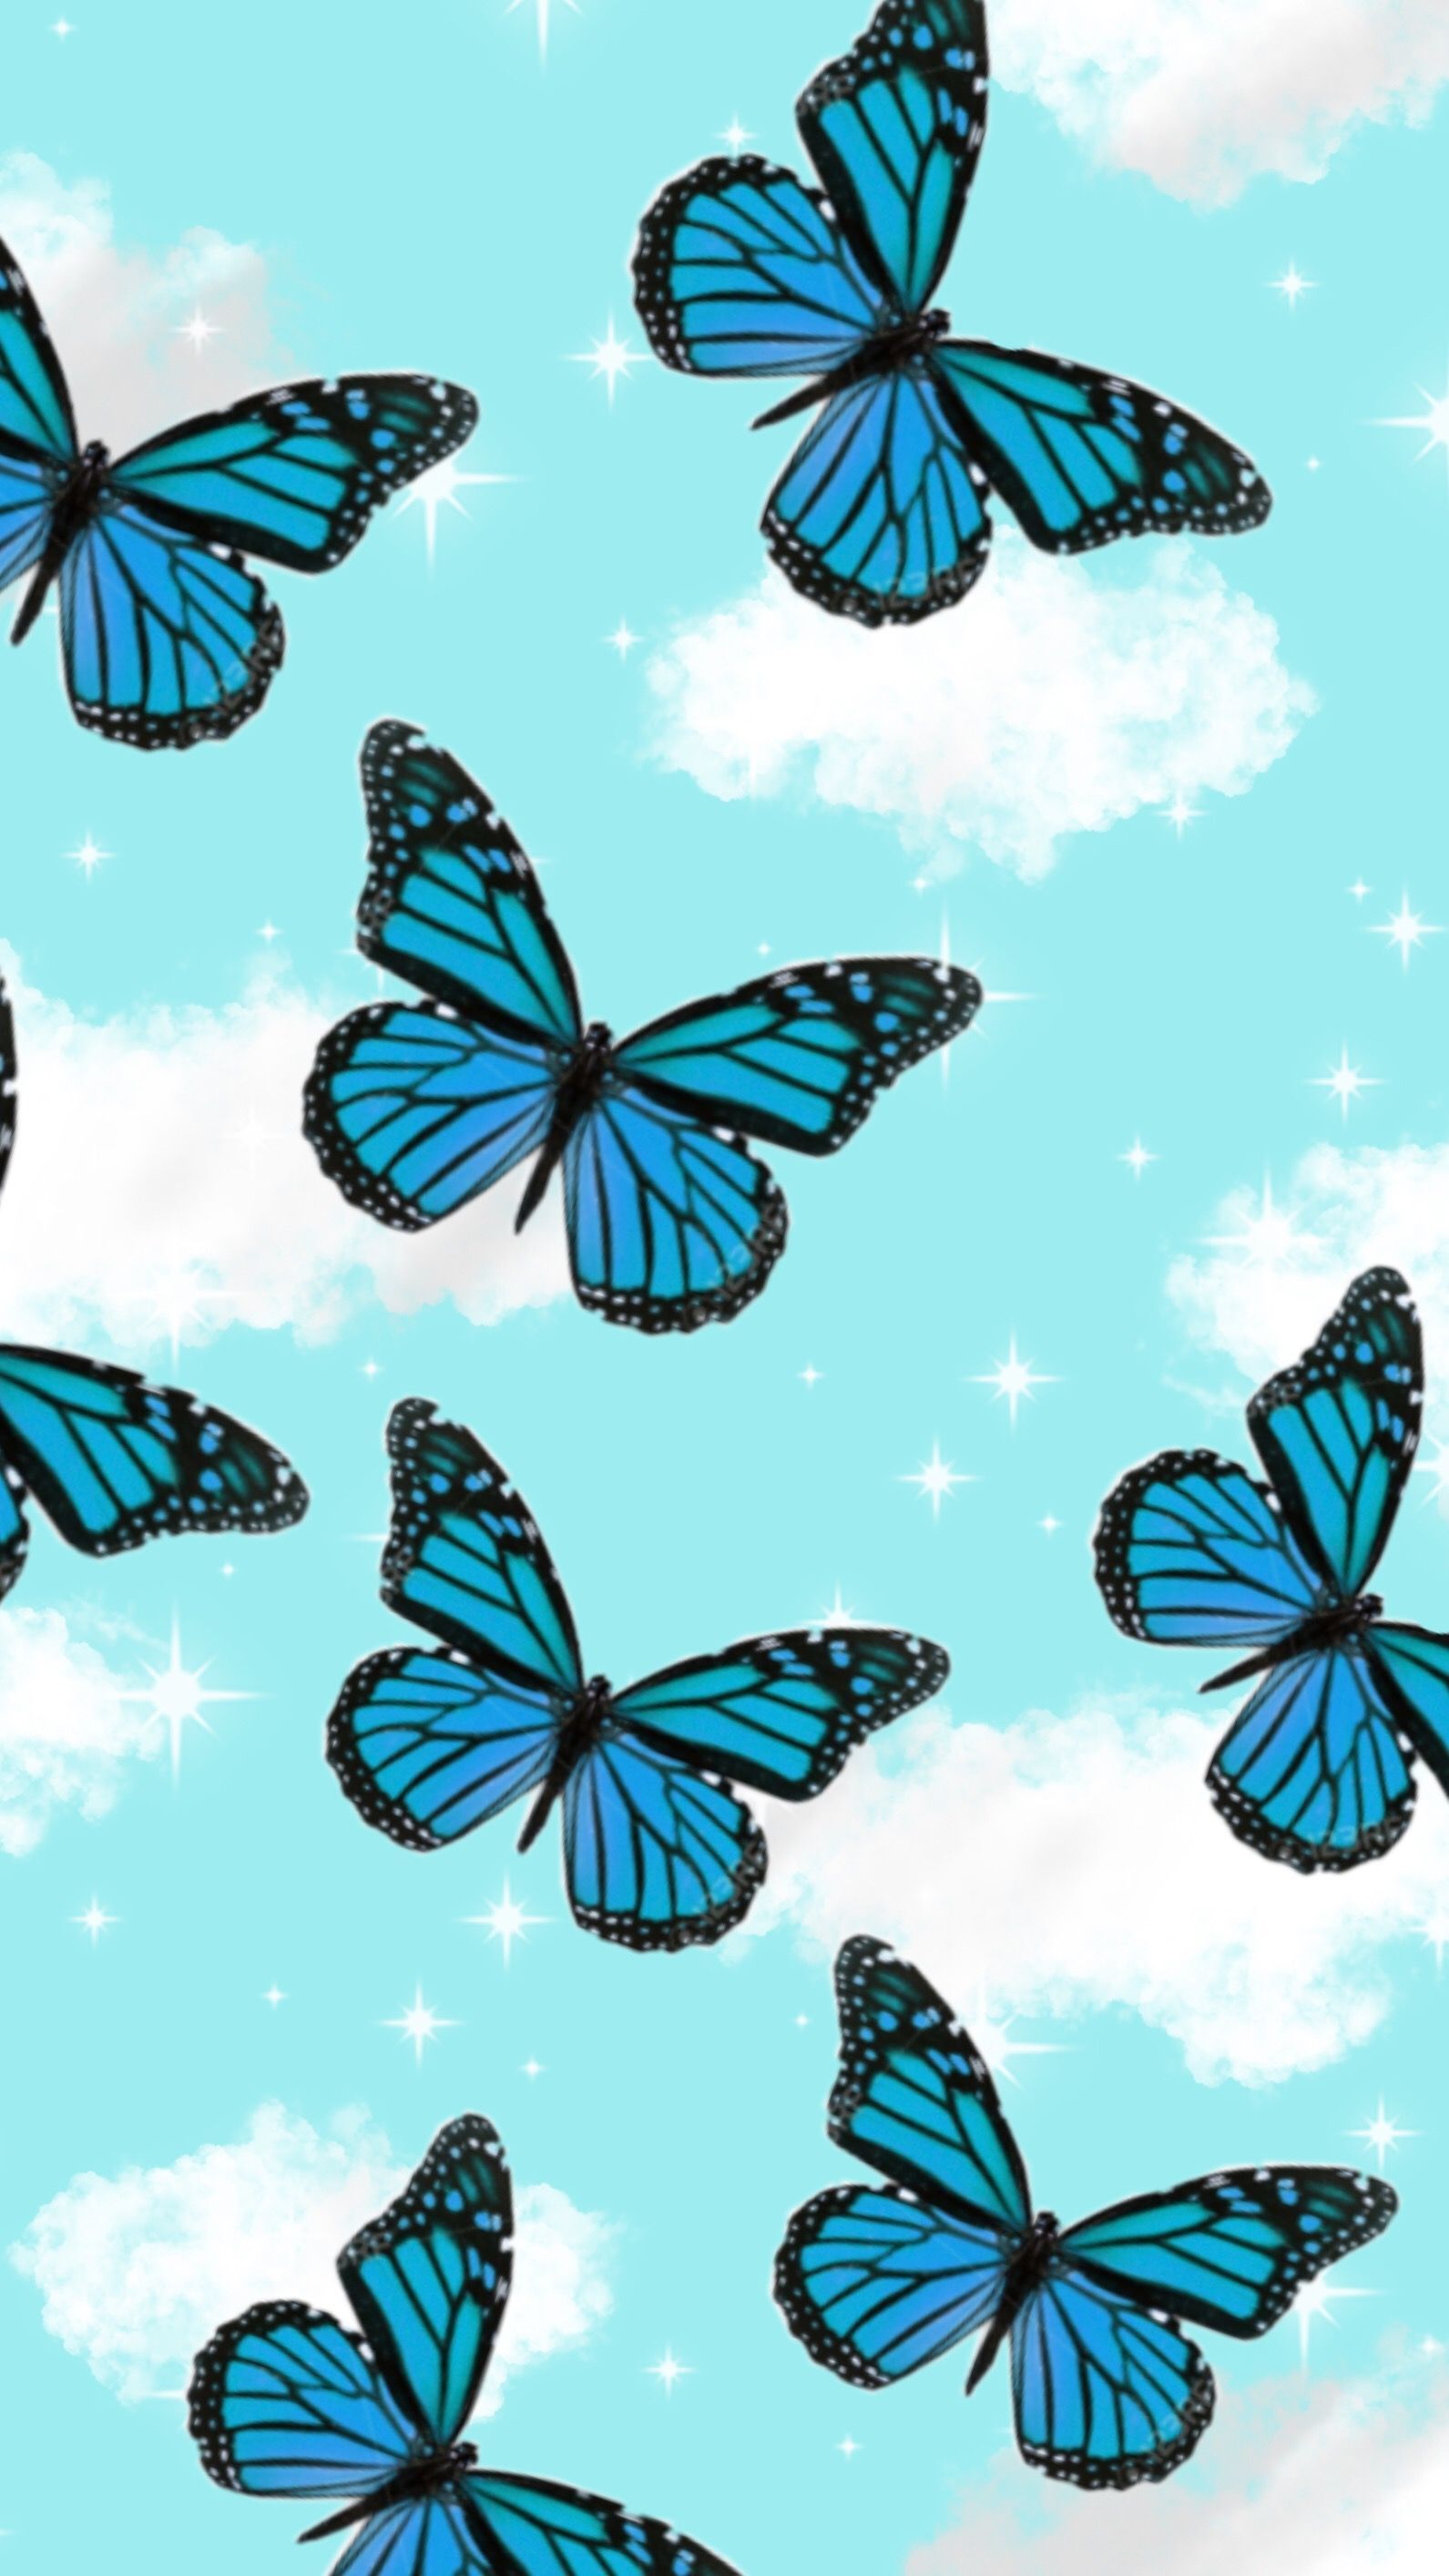 15 Greatest blue butterfly wallpaper aesthetic for laptop You Can Get ...